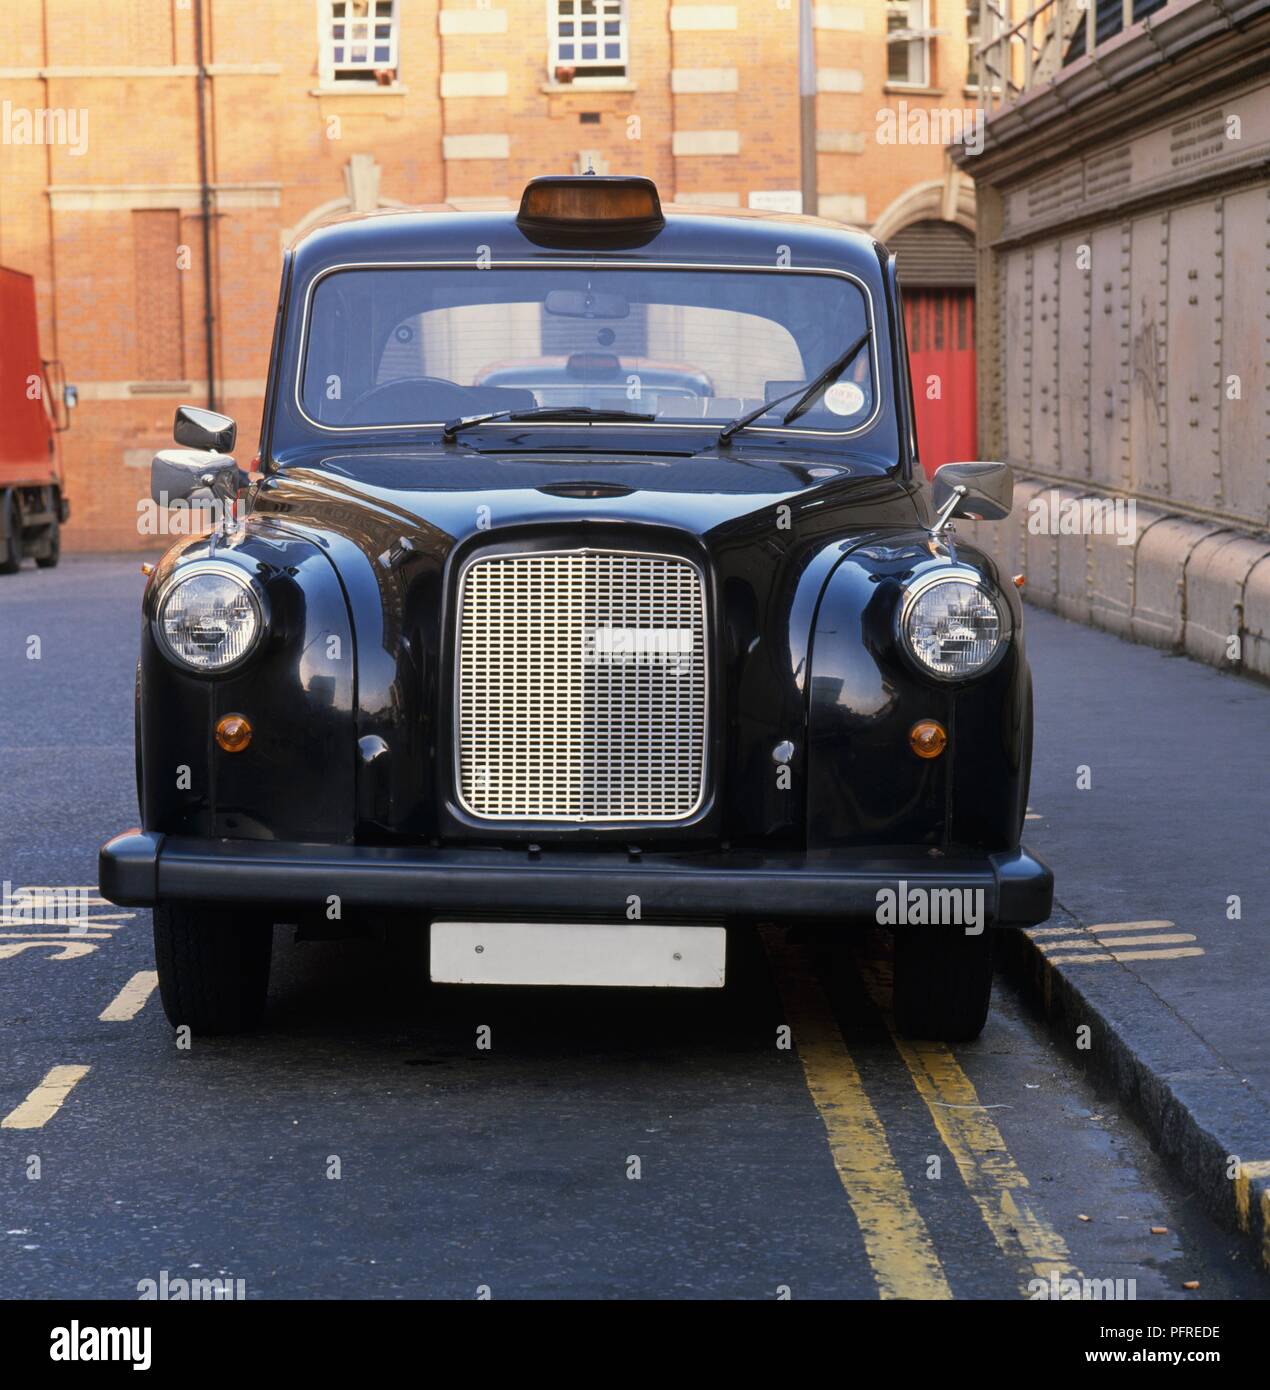 Great Britain, England, London, taxi cab parked in street Stock Photo